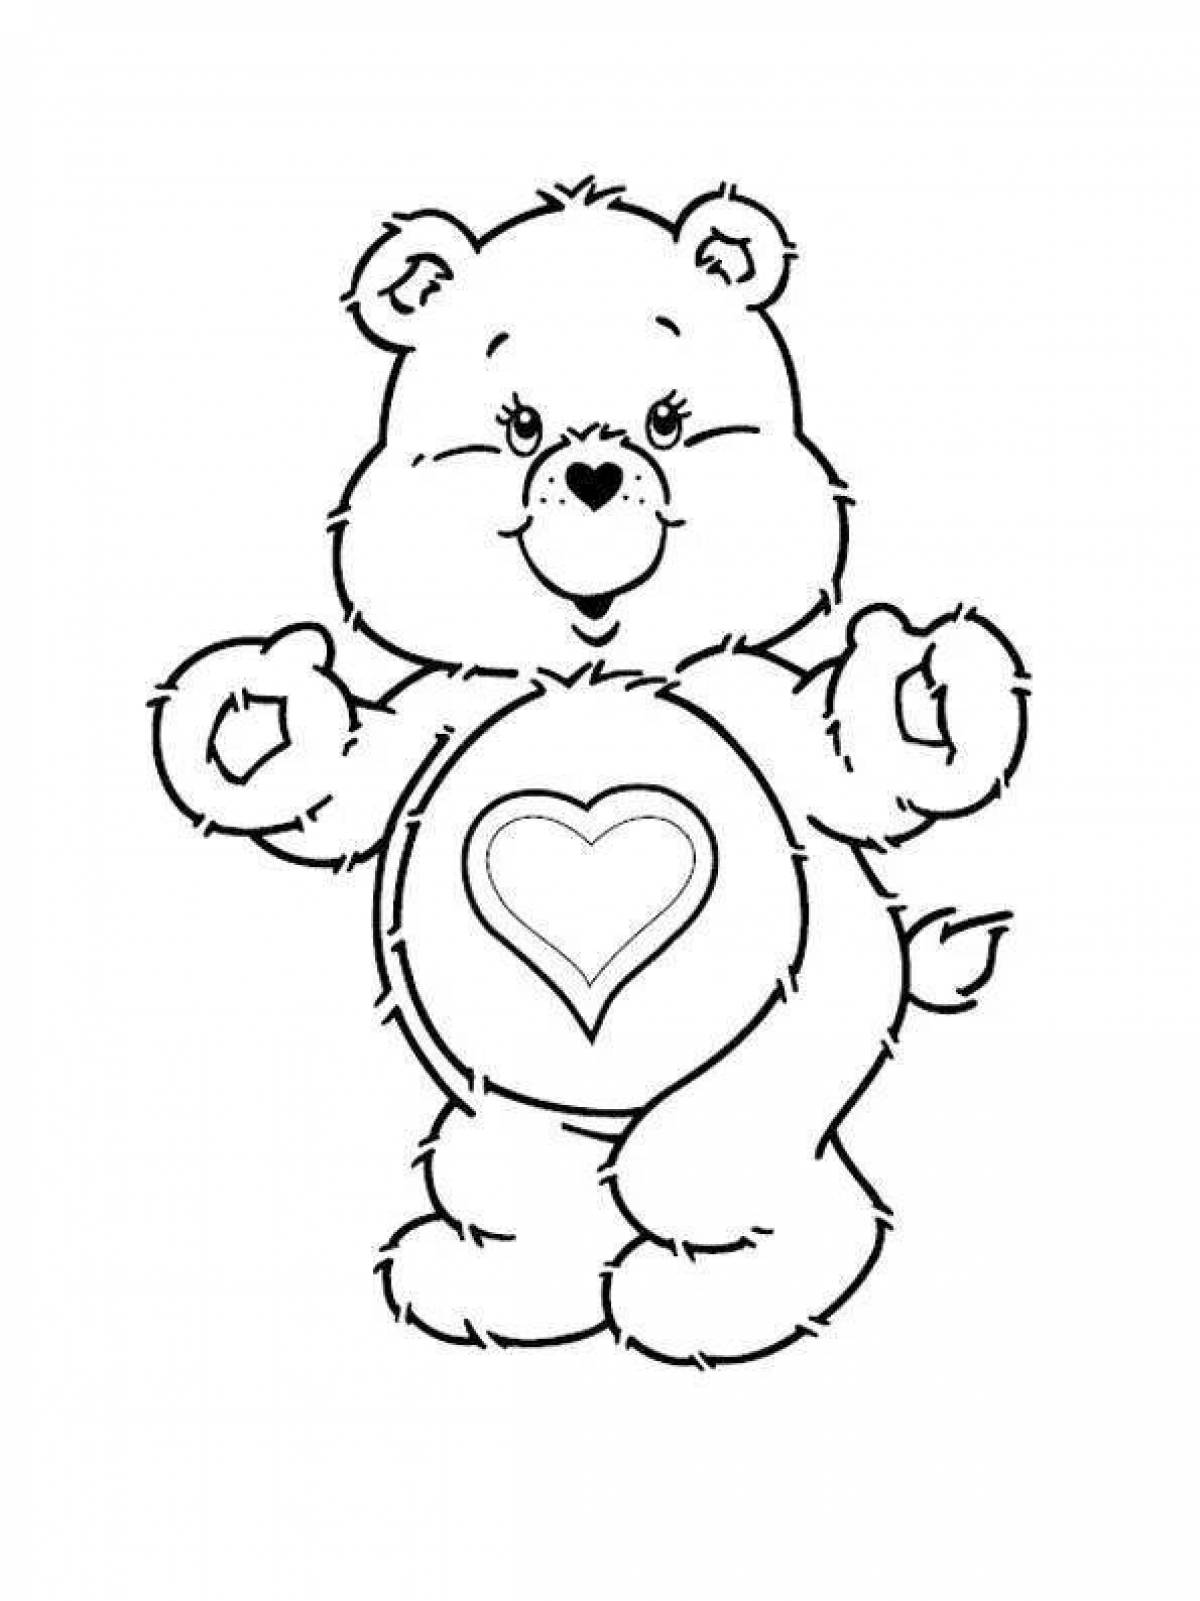 Gentle bear with a heart coloring